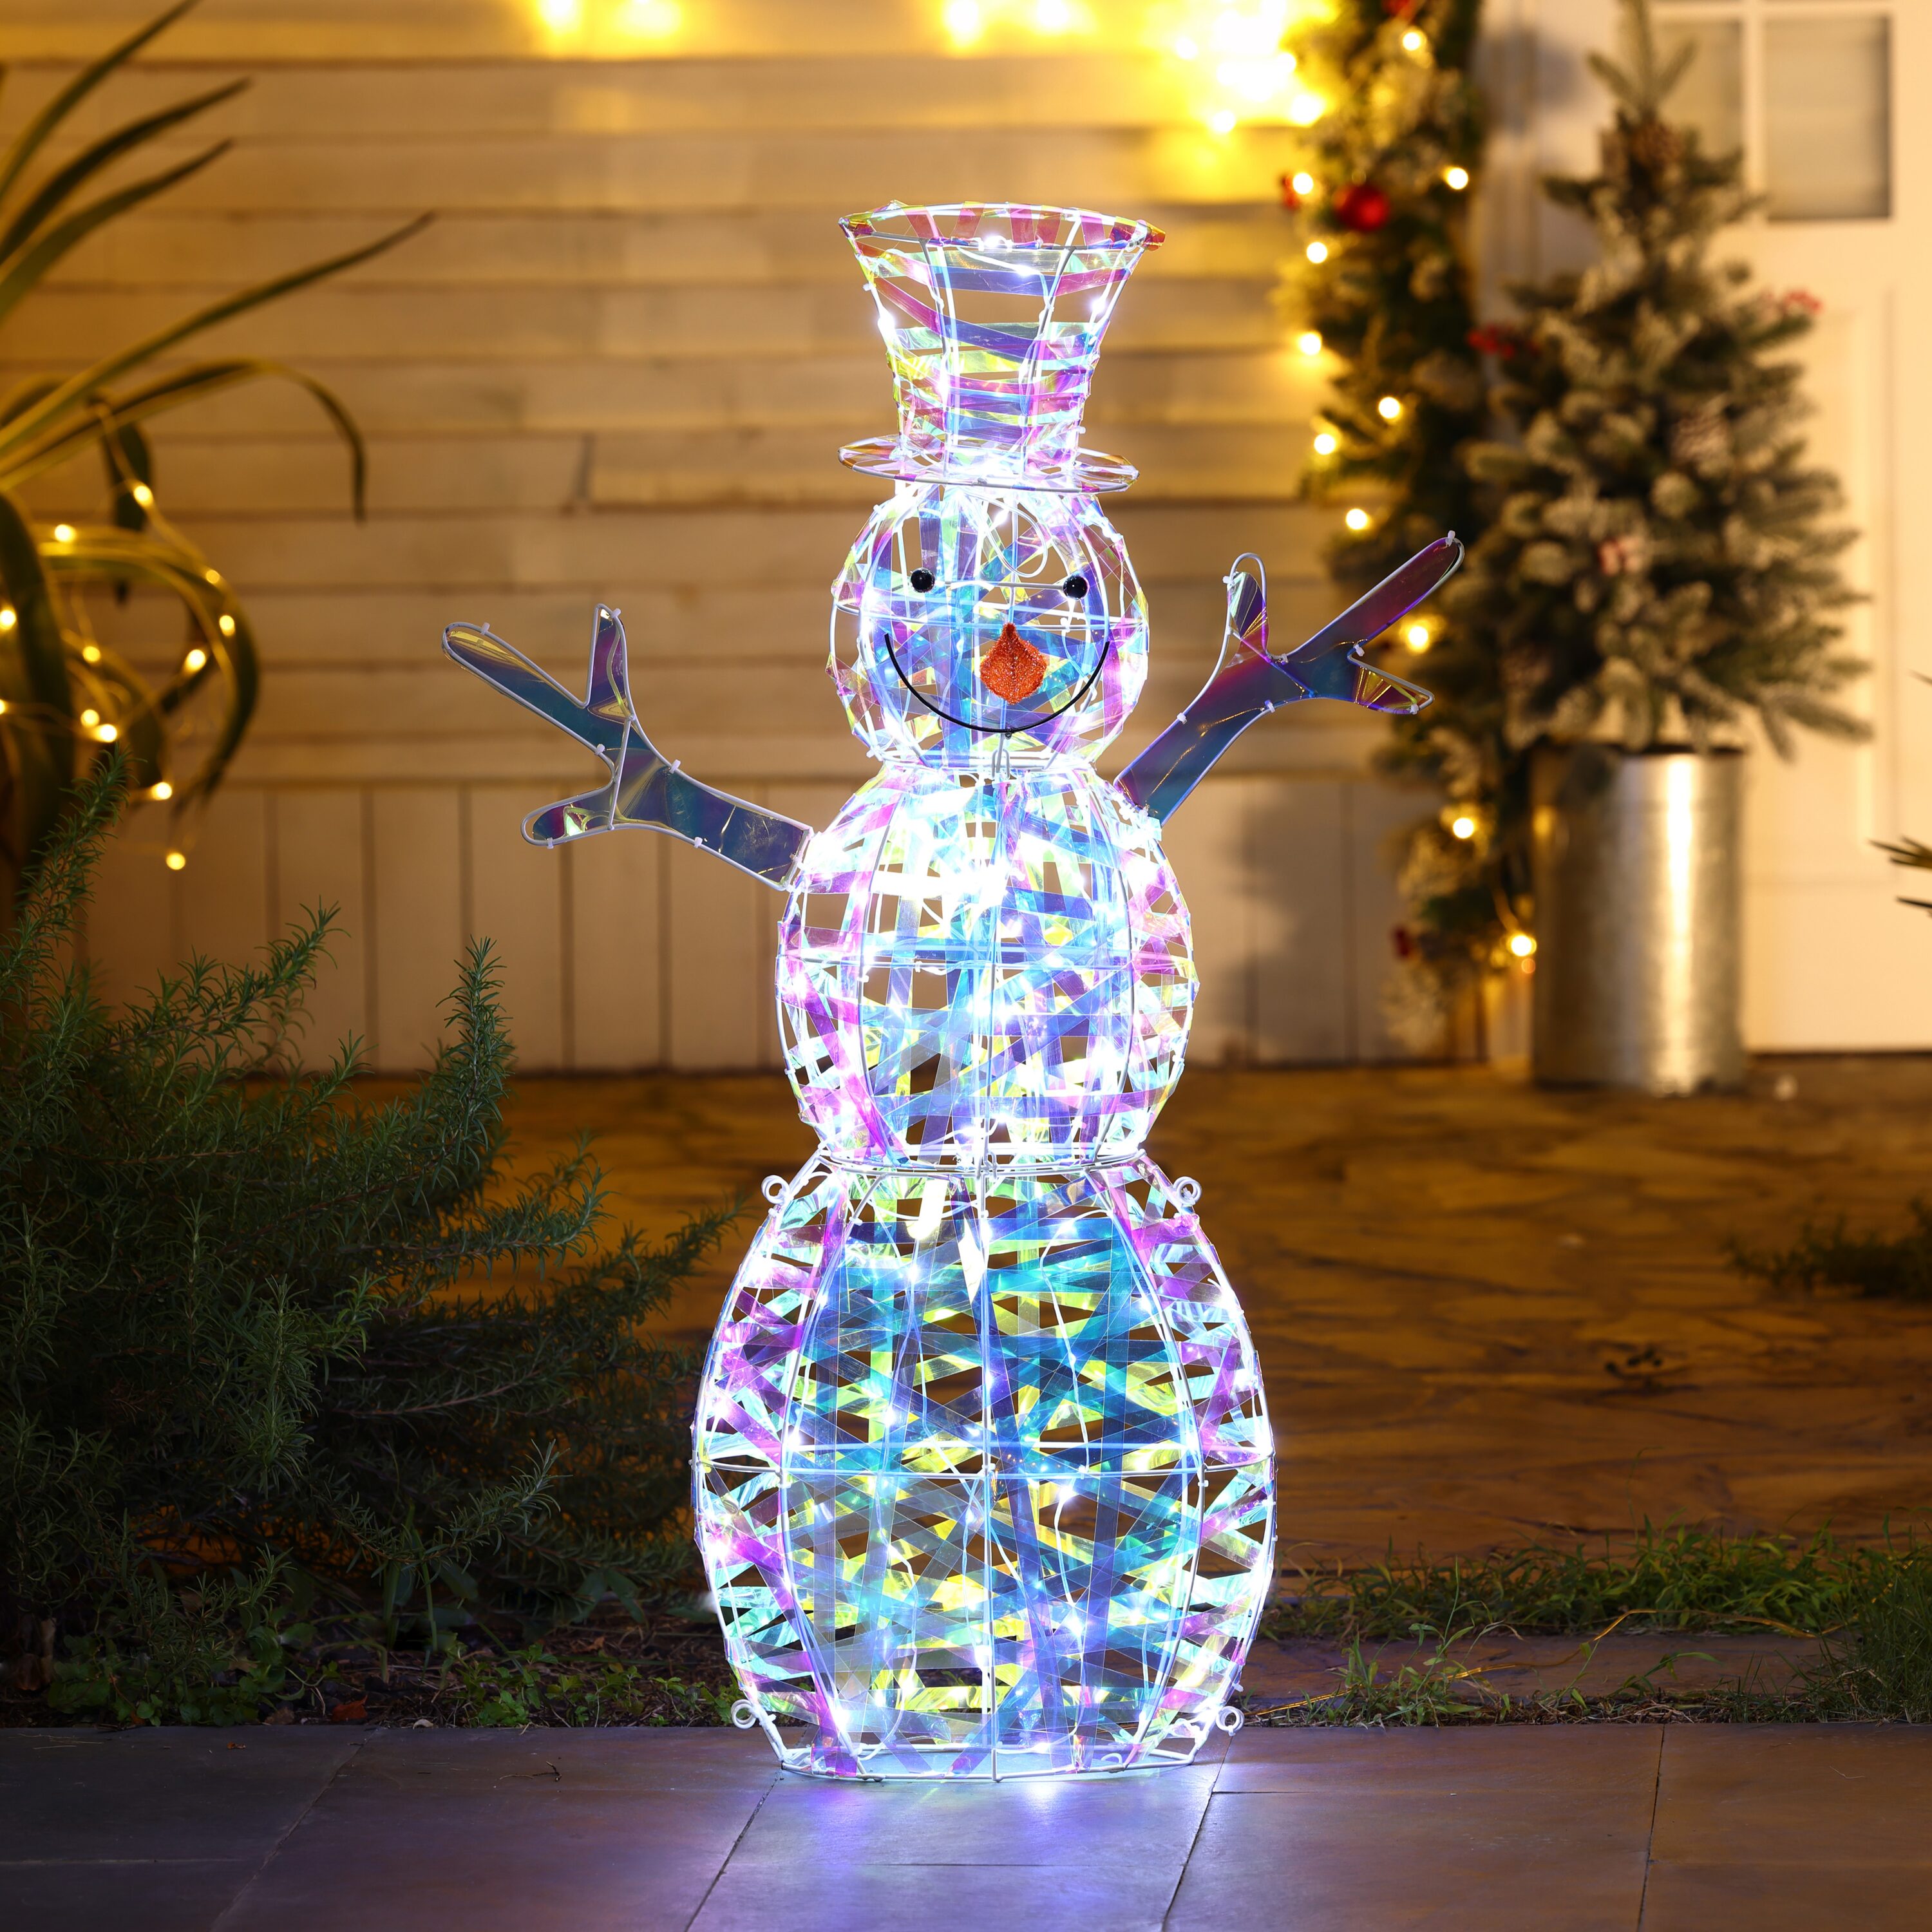 LuxenHome 41.8-in Snowman Yard Decoration with White LED Lights at 